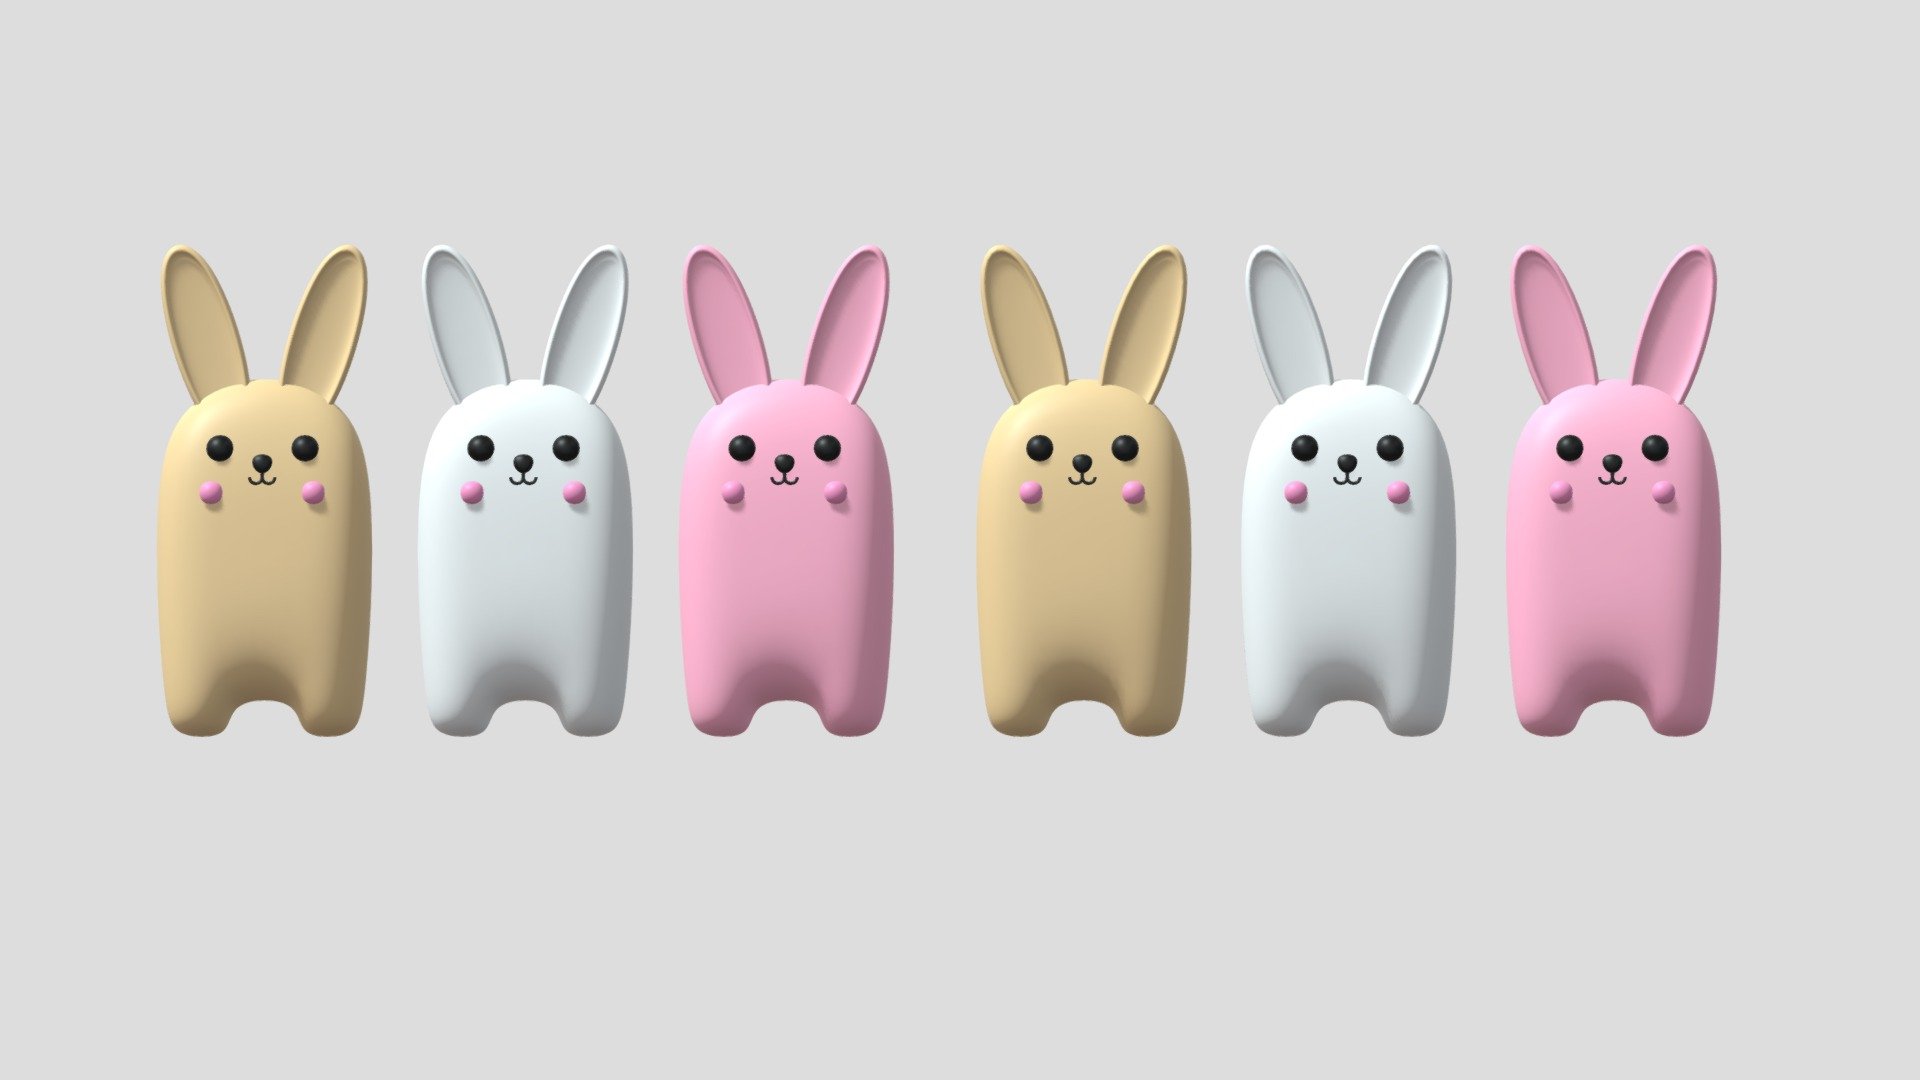 -Cartoon Cute Bunny Rabbit.

-This product contains 9 objects.

-High Poly : Verts : 18,691 Faces : 18,719.

-Mid Poly : Verts : 6,691 Faces : 6,719.

-This product was created in Blender 2.935.

-Formats: blend, fbx, obj, c4d, dae, abc, stl, glb, unity.

-We hope you enjoy this model.

-Thank you 3d model